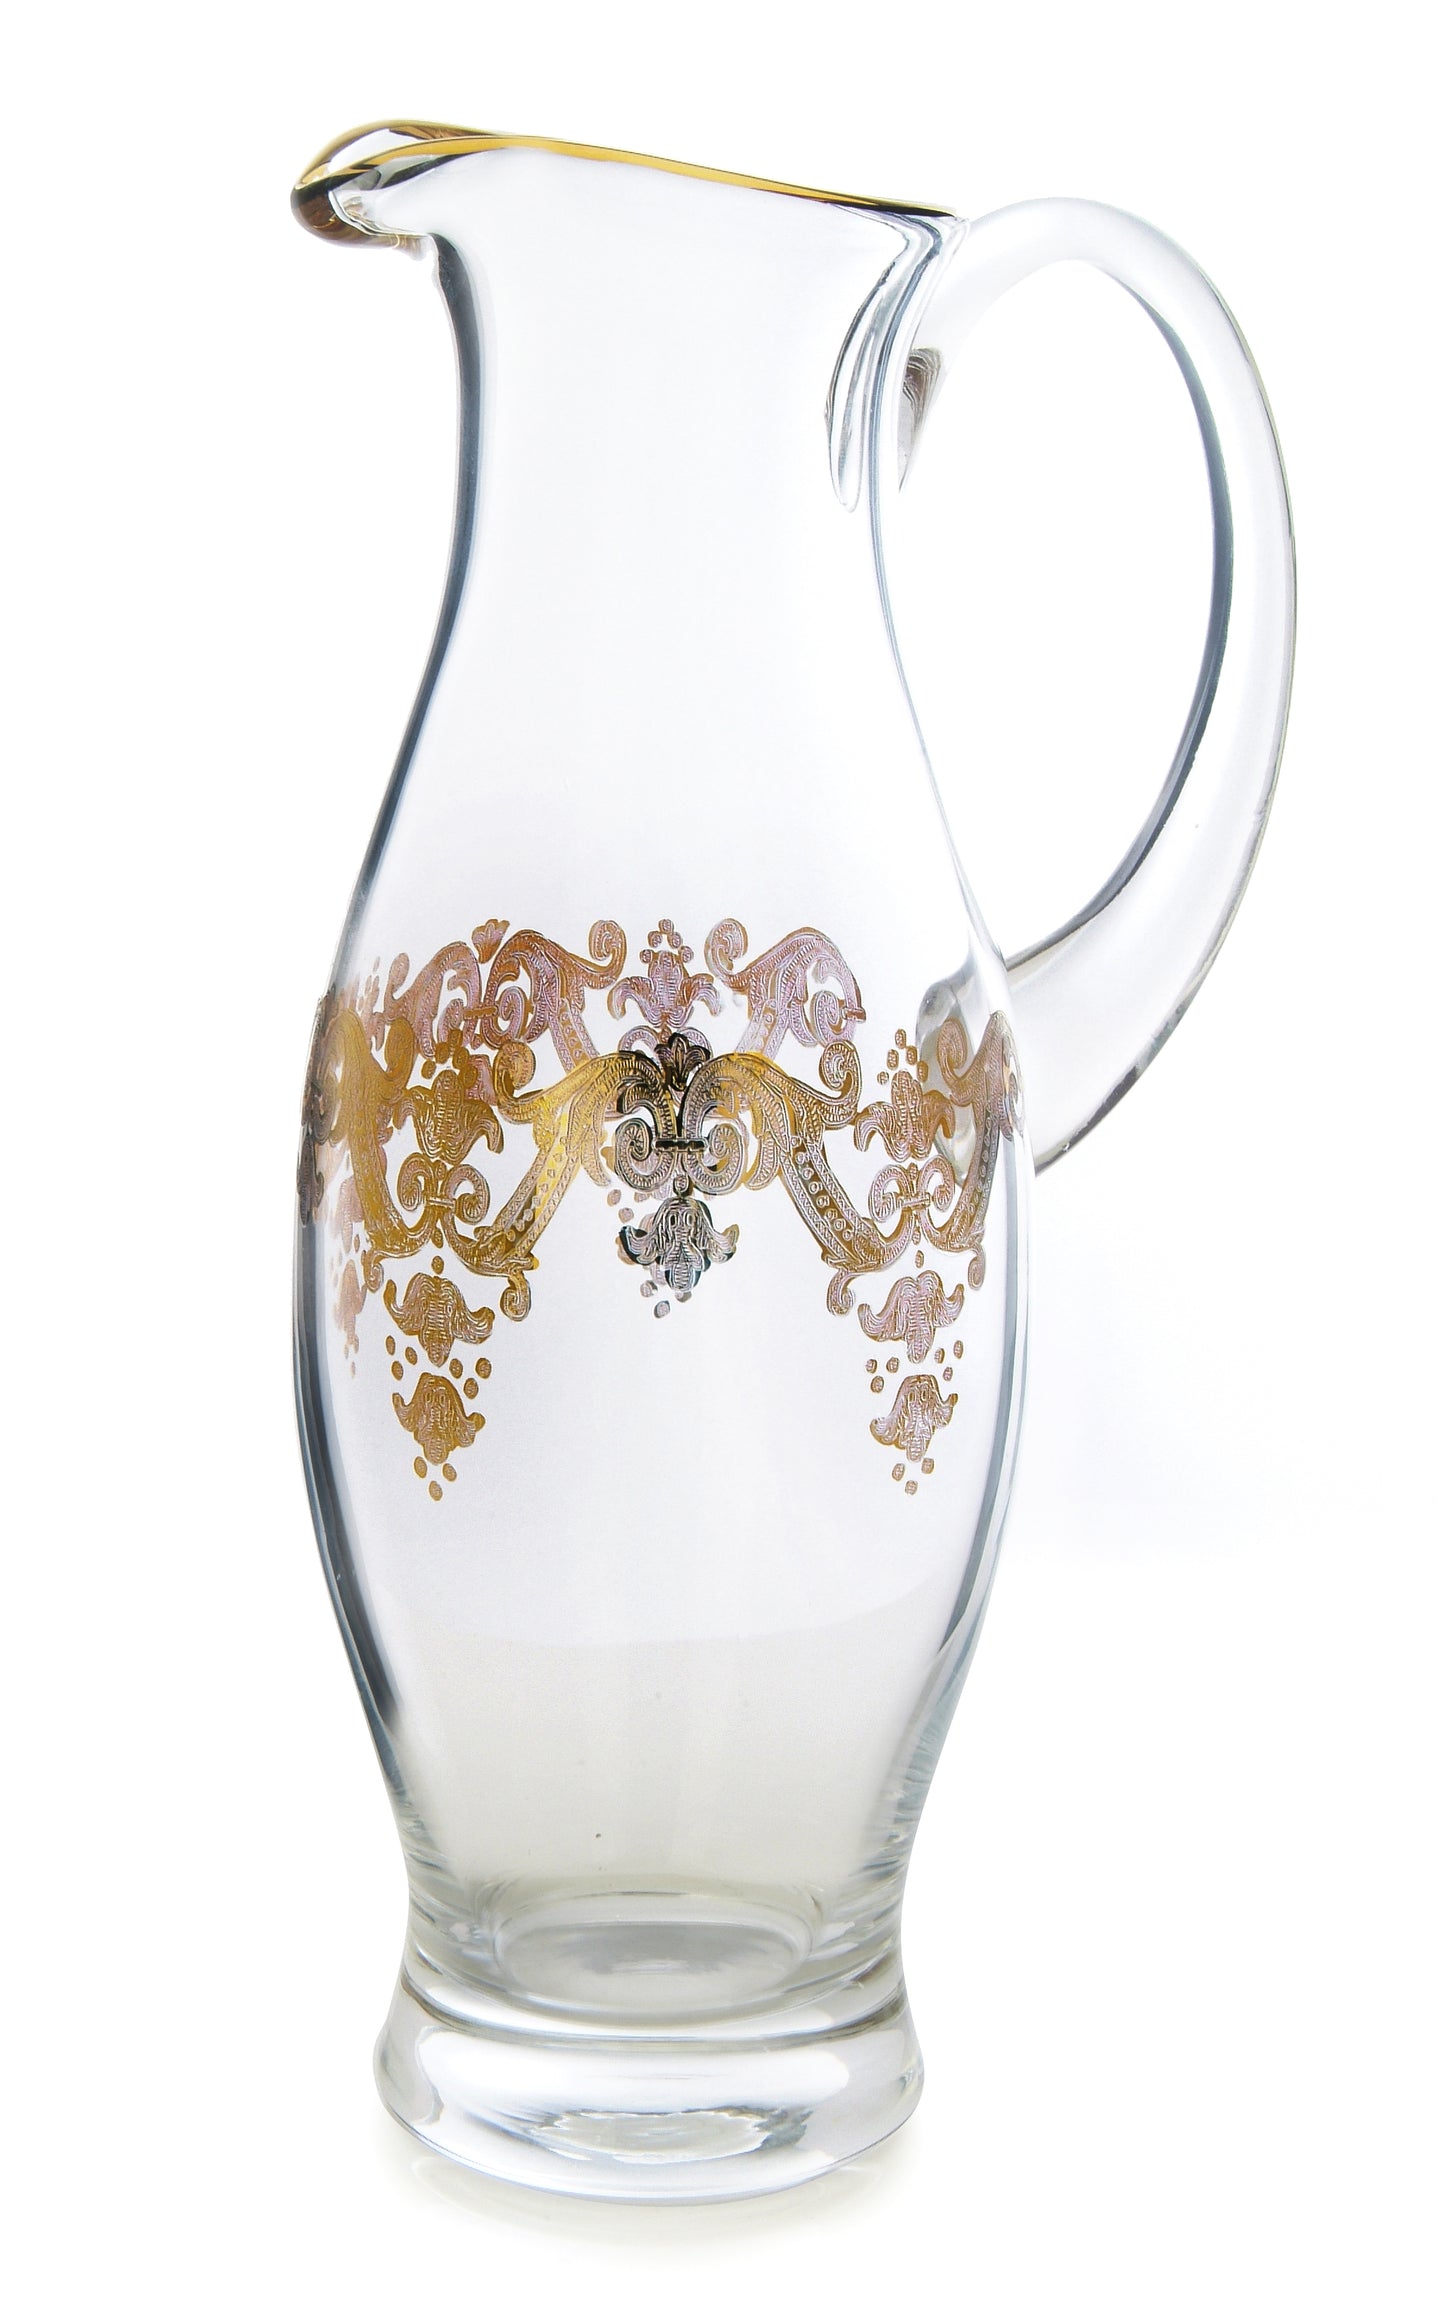 Pitcher with 24k Gold Artwork